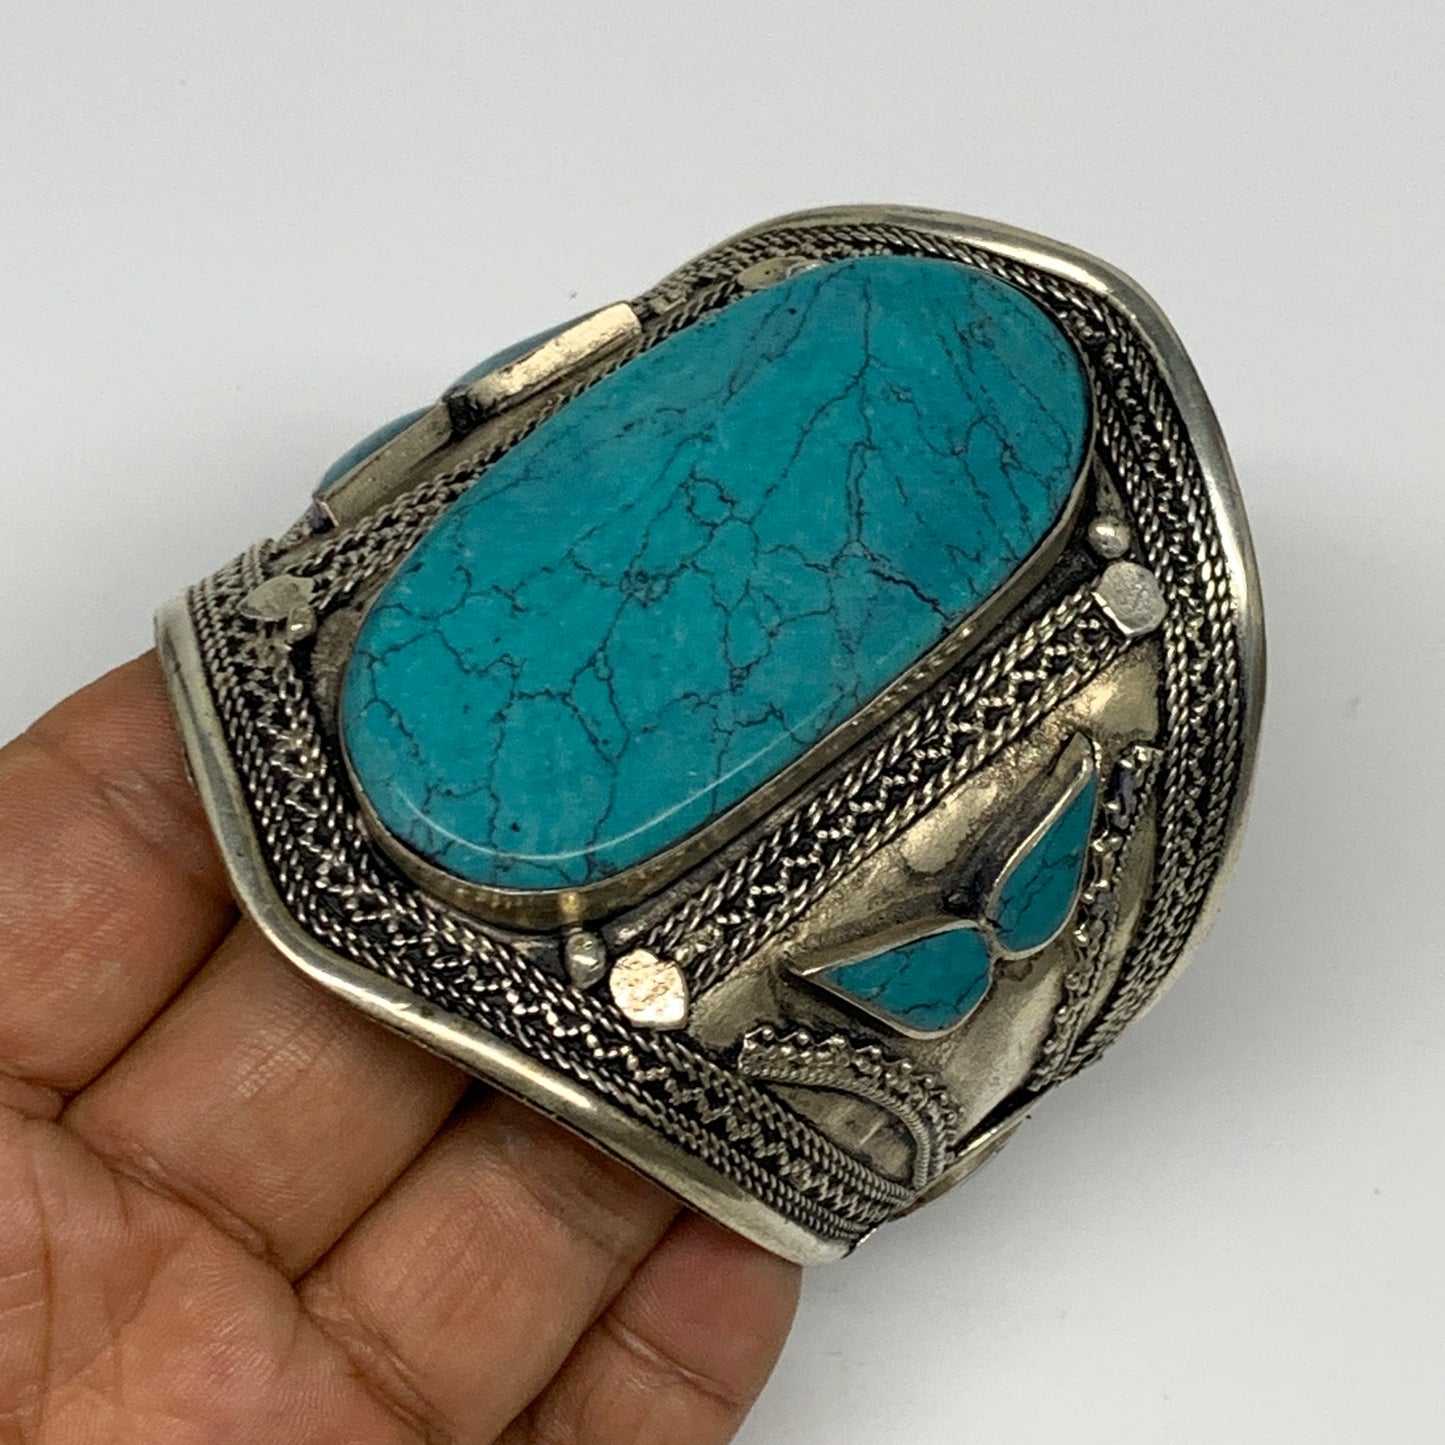 56.1g, 3.2" Vintage Reproduced Afghan Turkmen Synthetic Turquoise Cuff Bracelet,